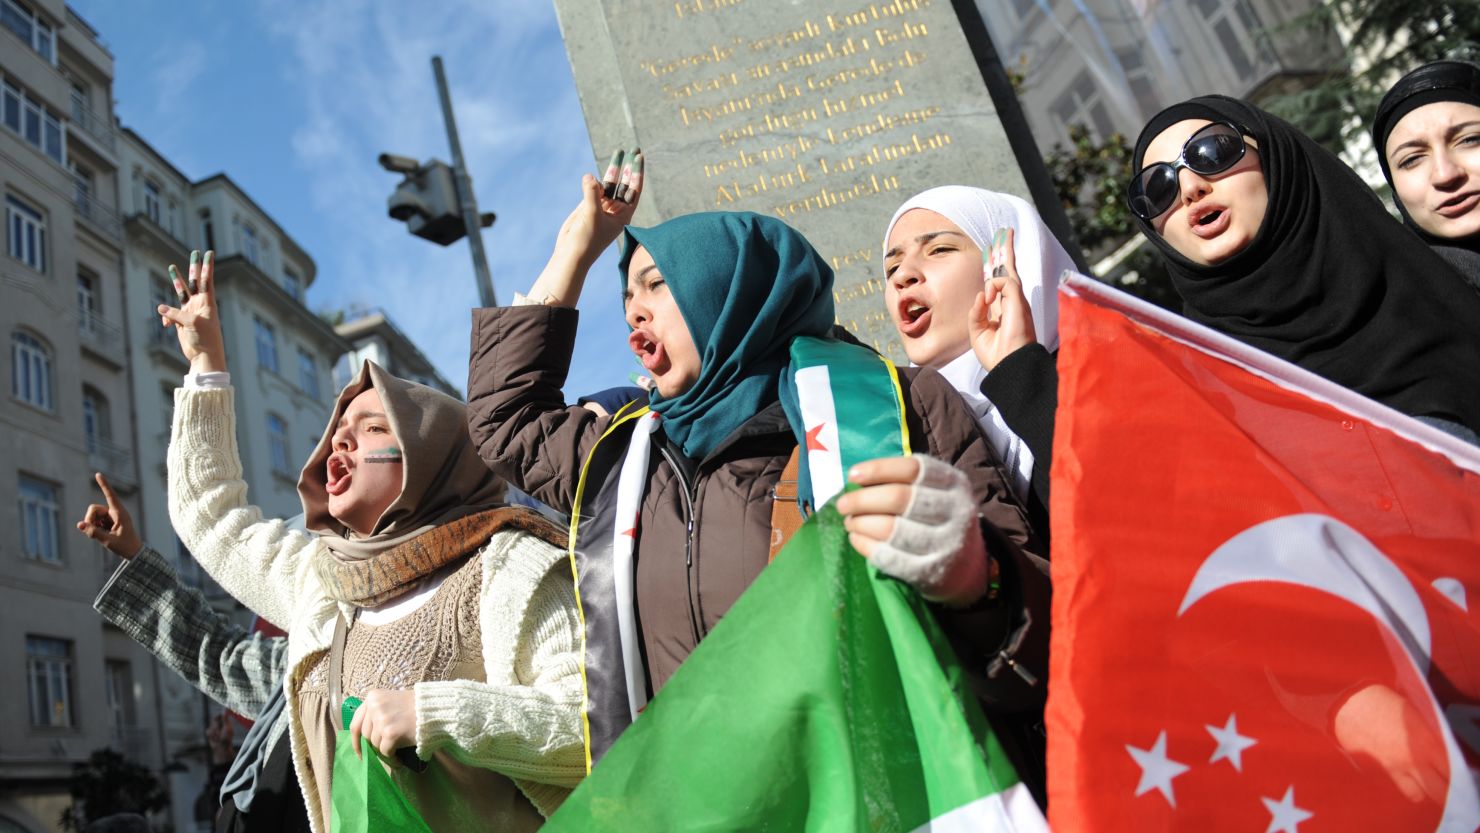 Demonstrators protest in front of the Syrian consulate in Istanbul, Turkey, this week.